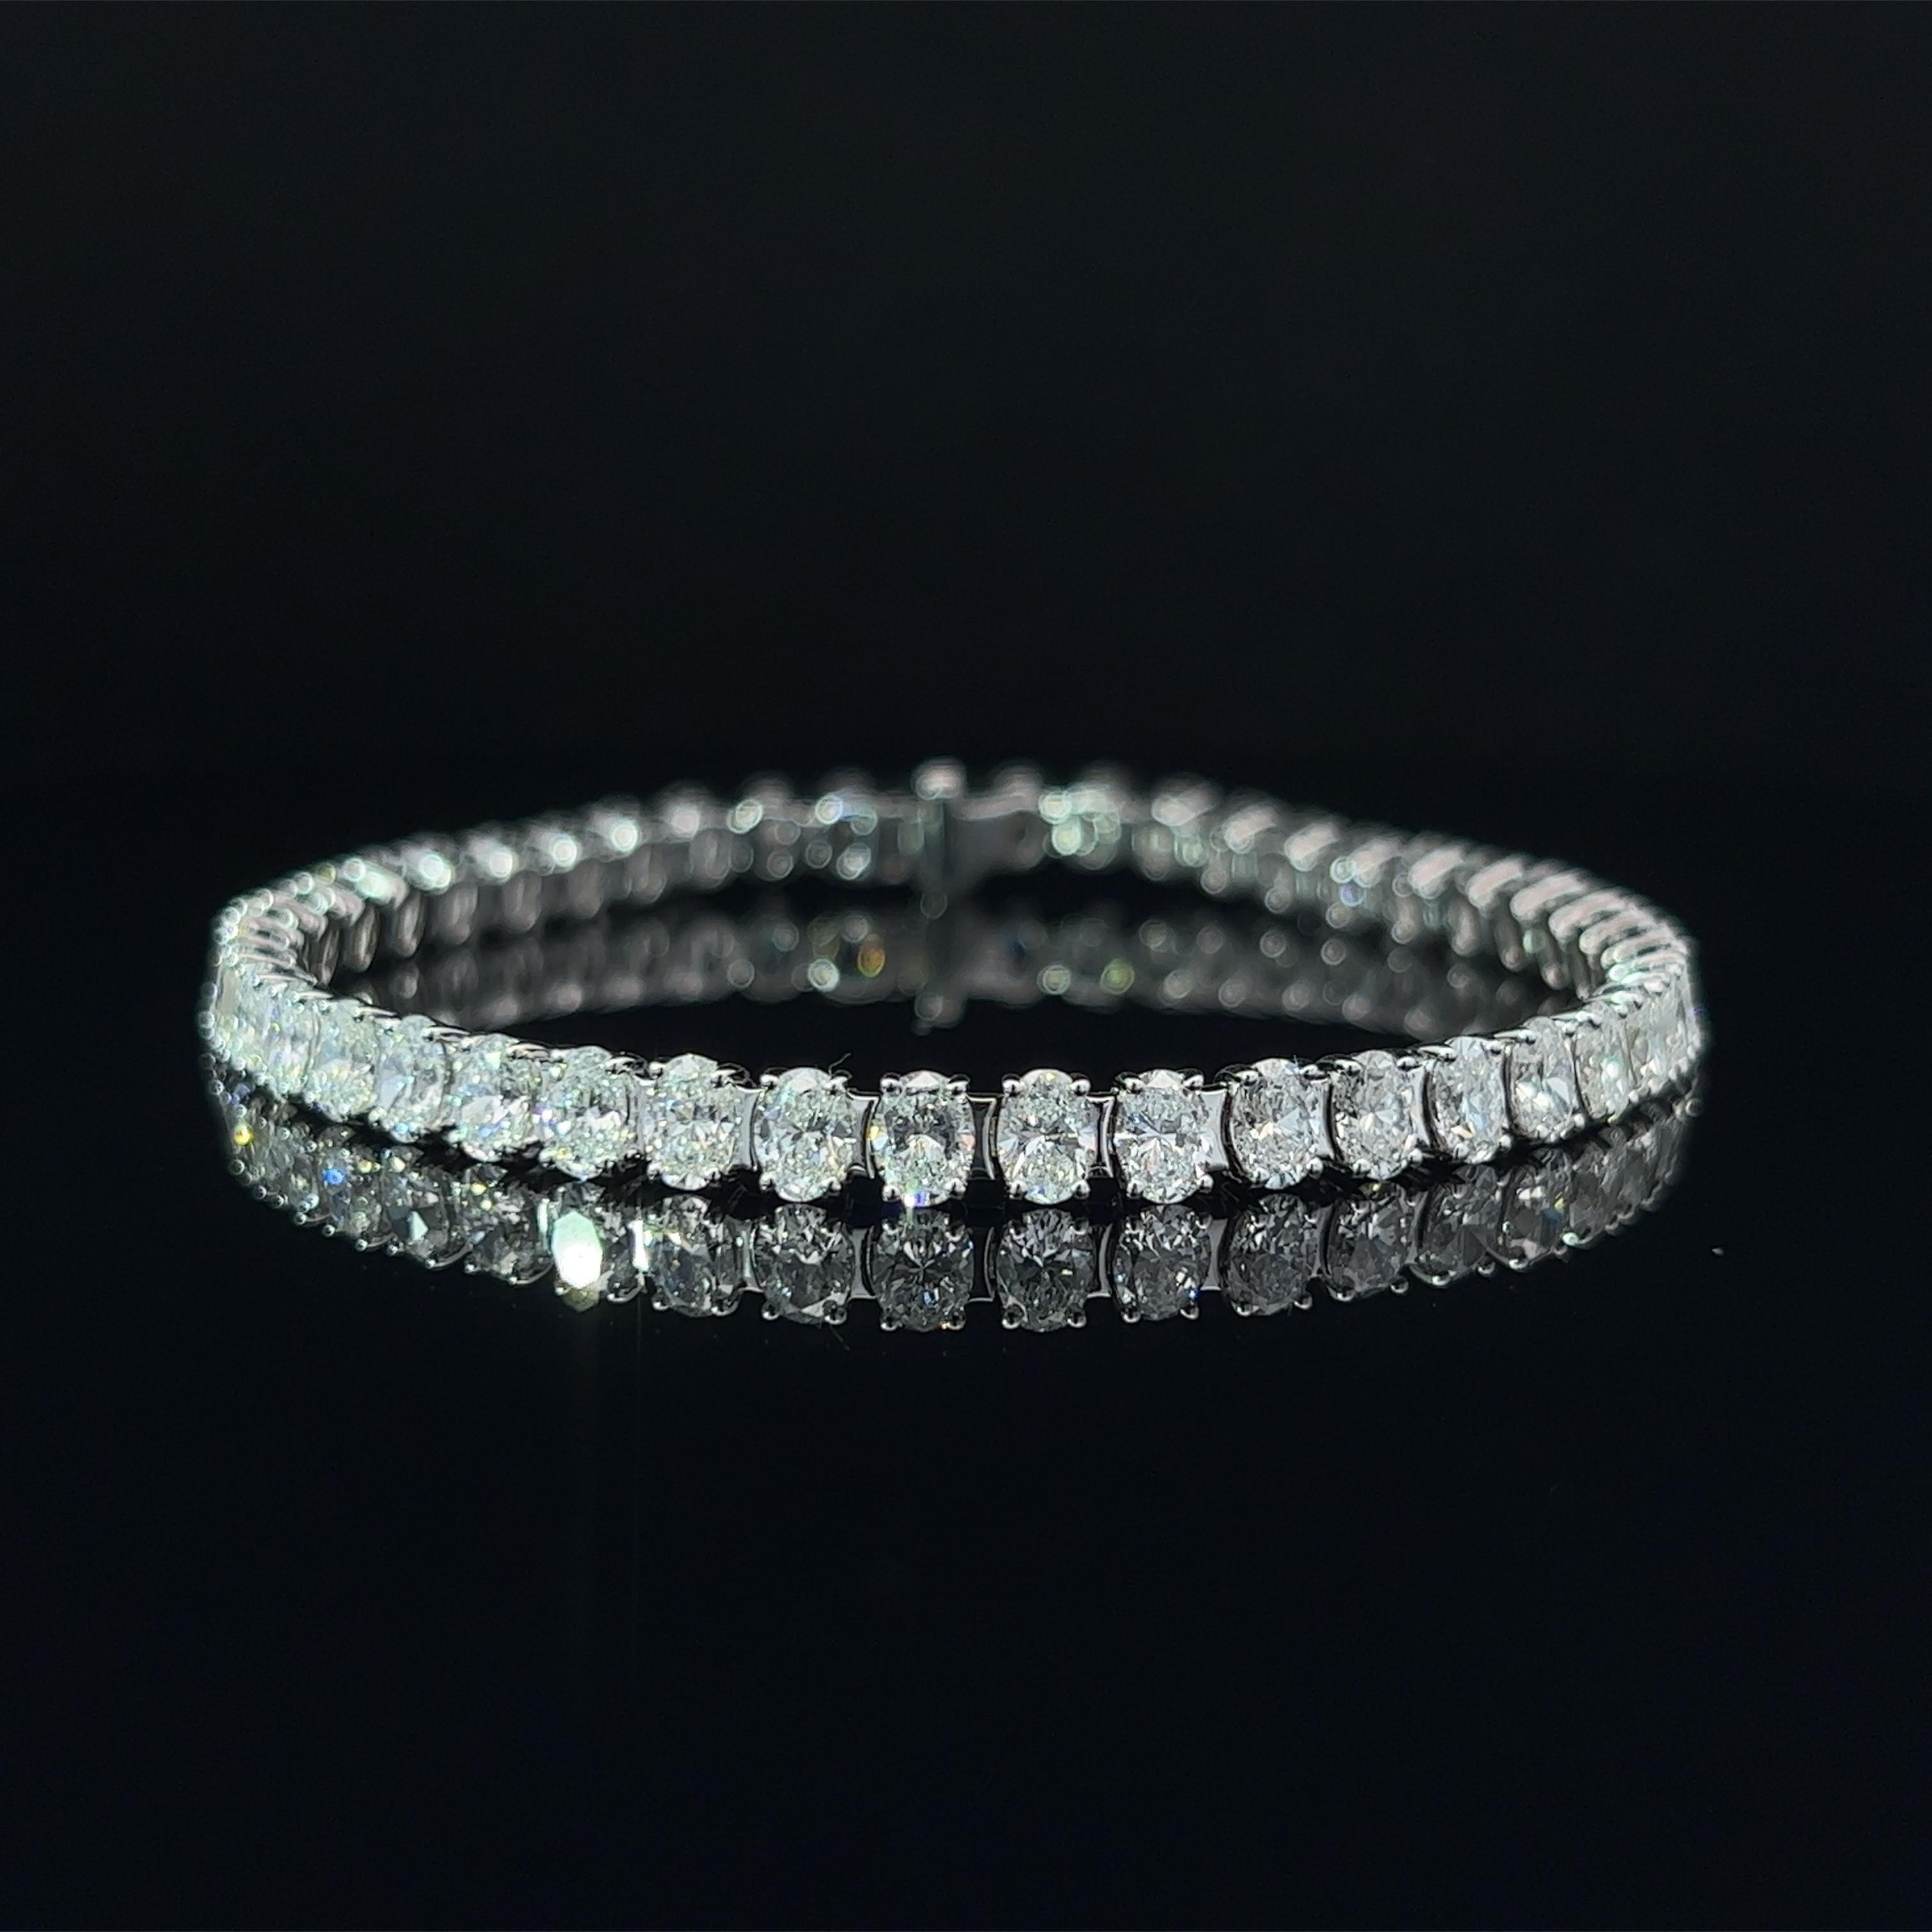 Diamond Shape: Oval Cut 
Total Diamond Weight: 10.59ct
Individual Diamond Weight: .25ct
Color/Clarity: GH VVS  
Metal: 18K White Gold  
Metal Weight: 14.18g 

Key Features:

Oval-Cut Diamonds: The centerpiece of this bracelet features a dazzling